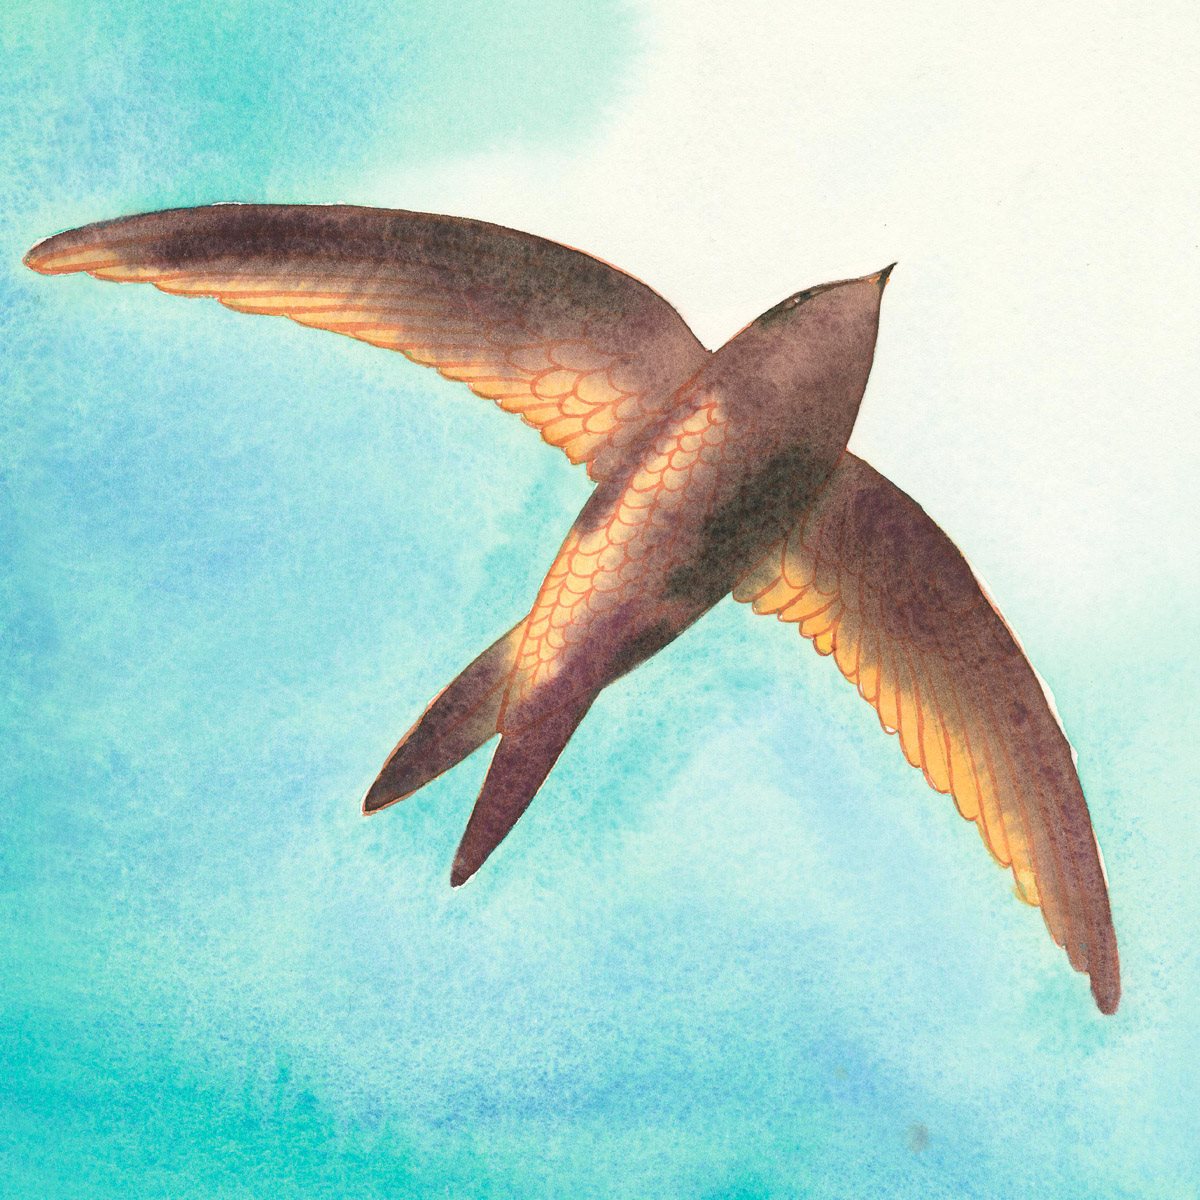 The common swift spends months at a time in the air never touching down - photo 18